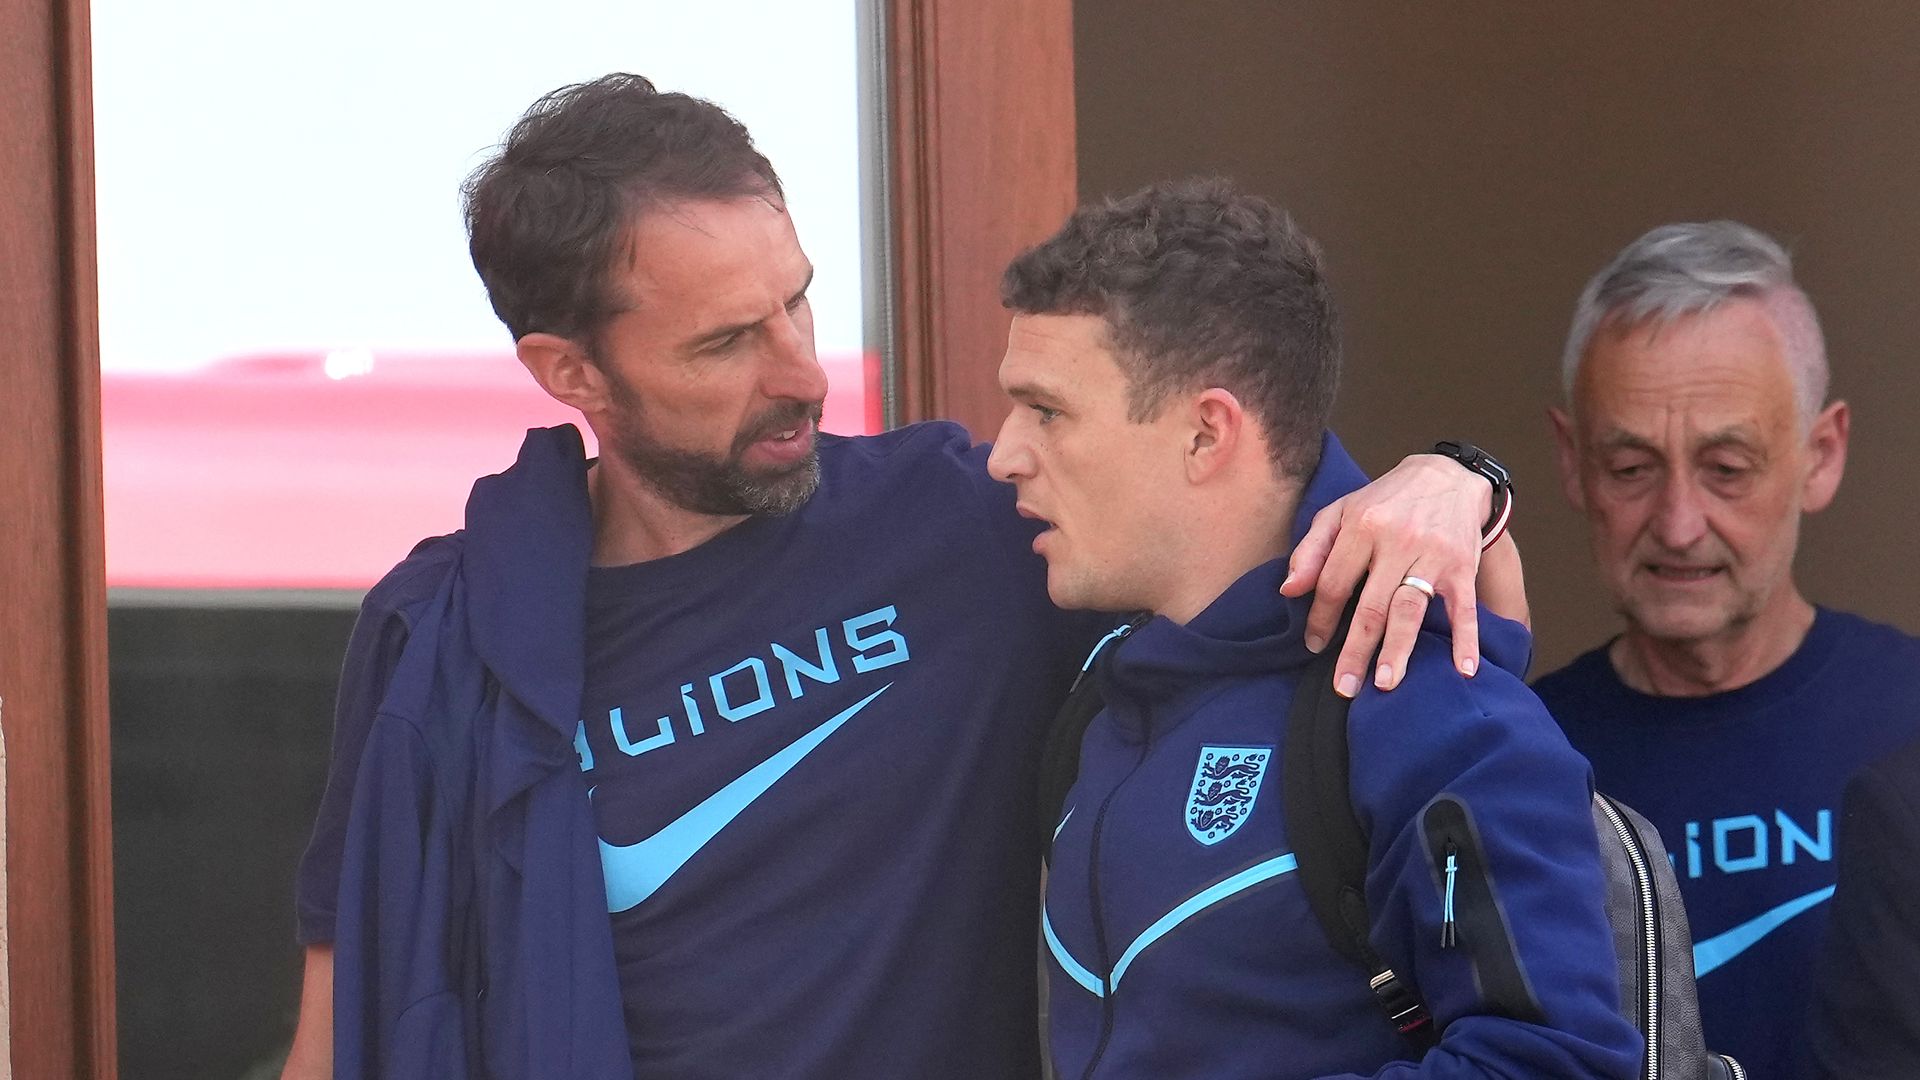 Southgate hints at England stay | Tells players: 'You're part of my plans'